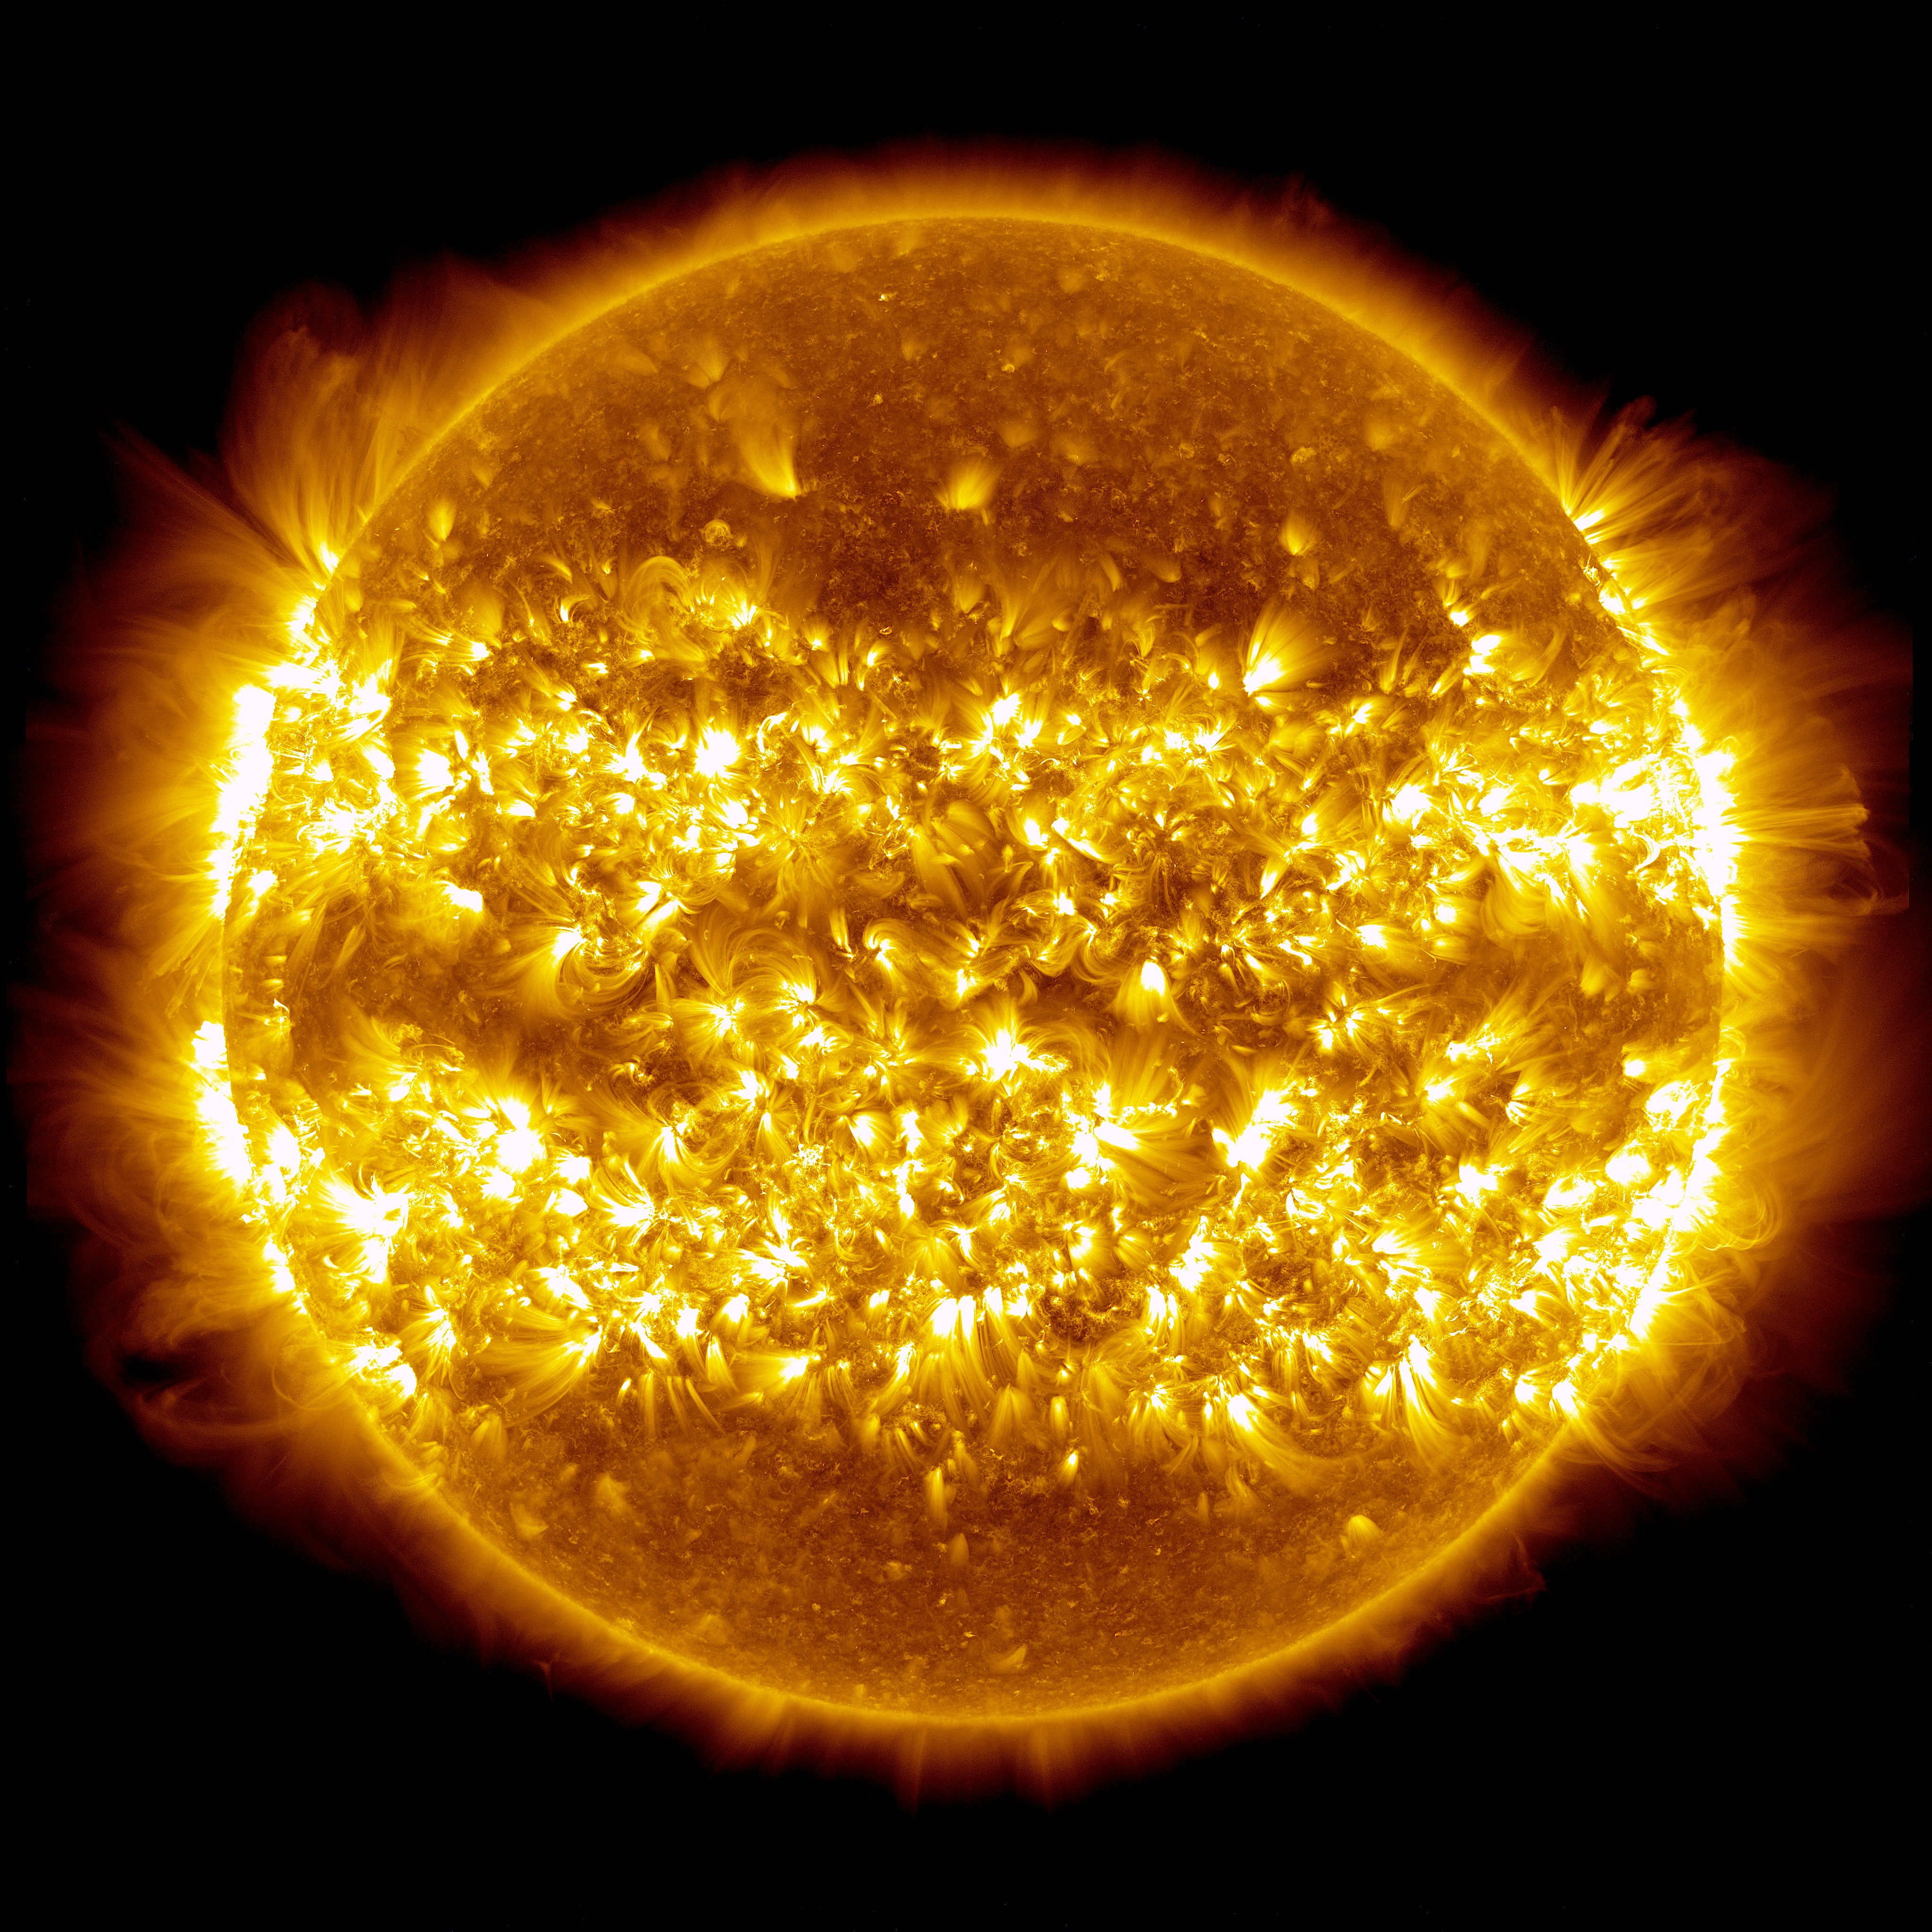 Image credit: composite of 25 images of the sun, showing solar outburst/activity over a 365 day period; NASA / Solar Dynamics Observatory / Atmospheric Imaging Assembly / S. Wiessinger; post-processing by E. Siegel.